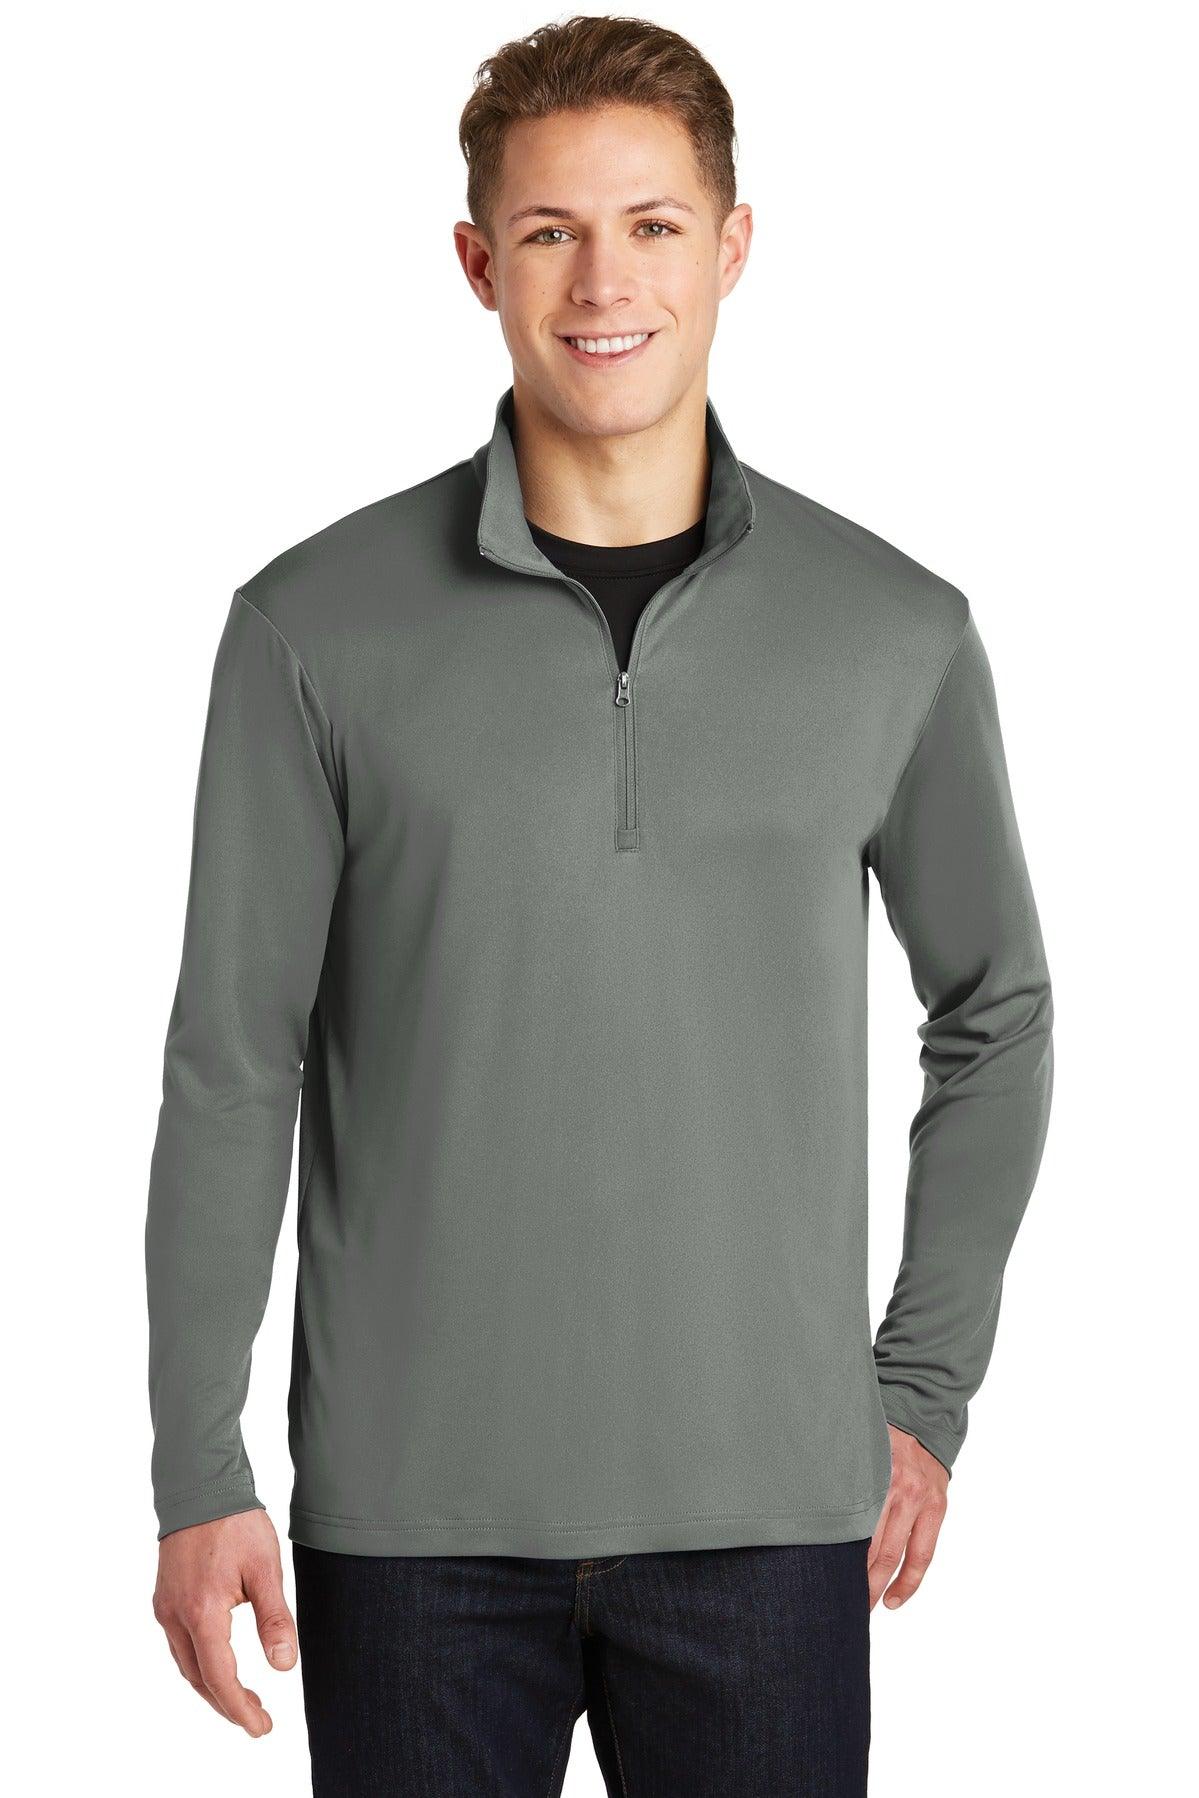 Sport-Tek PosiCharge Competitor 1/4-Zip Pullover. ST357 - Dresses Max